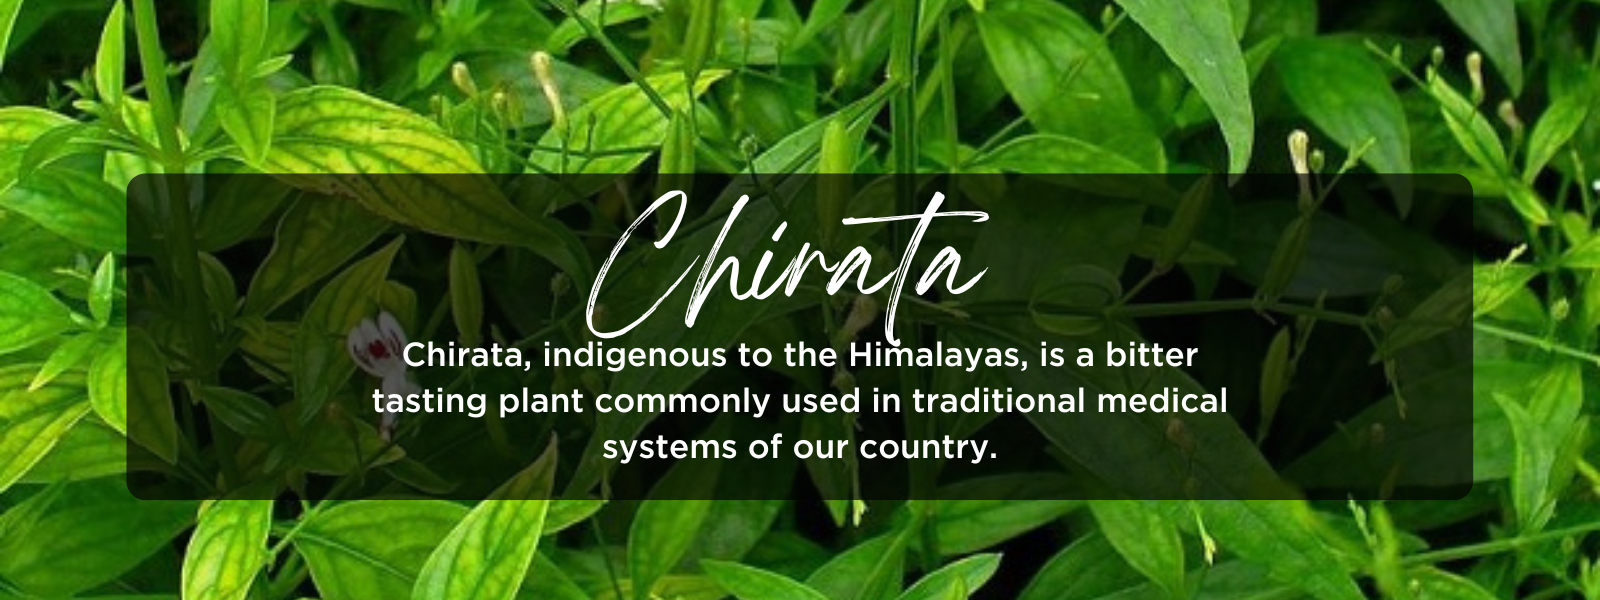 Chirata- Health Benefits, Uses and Important Facts